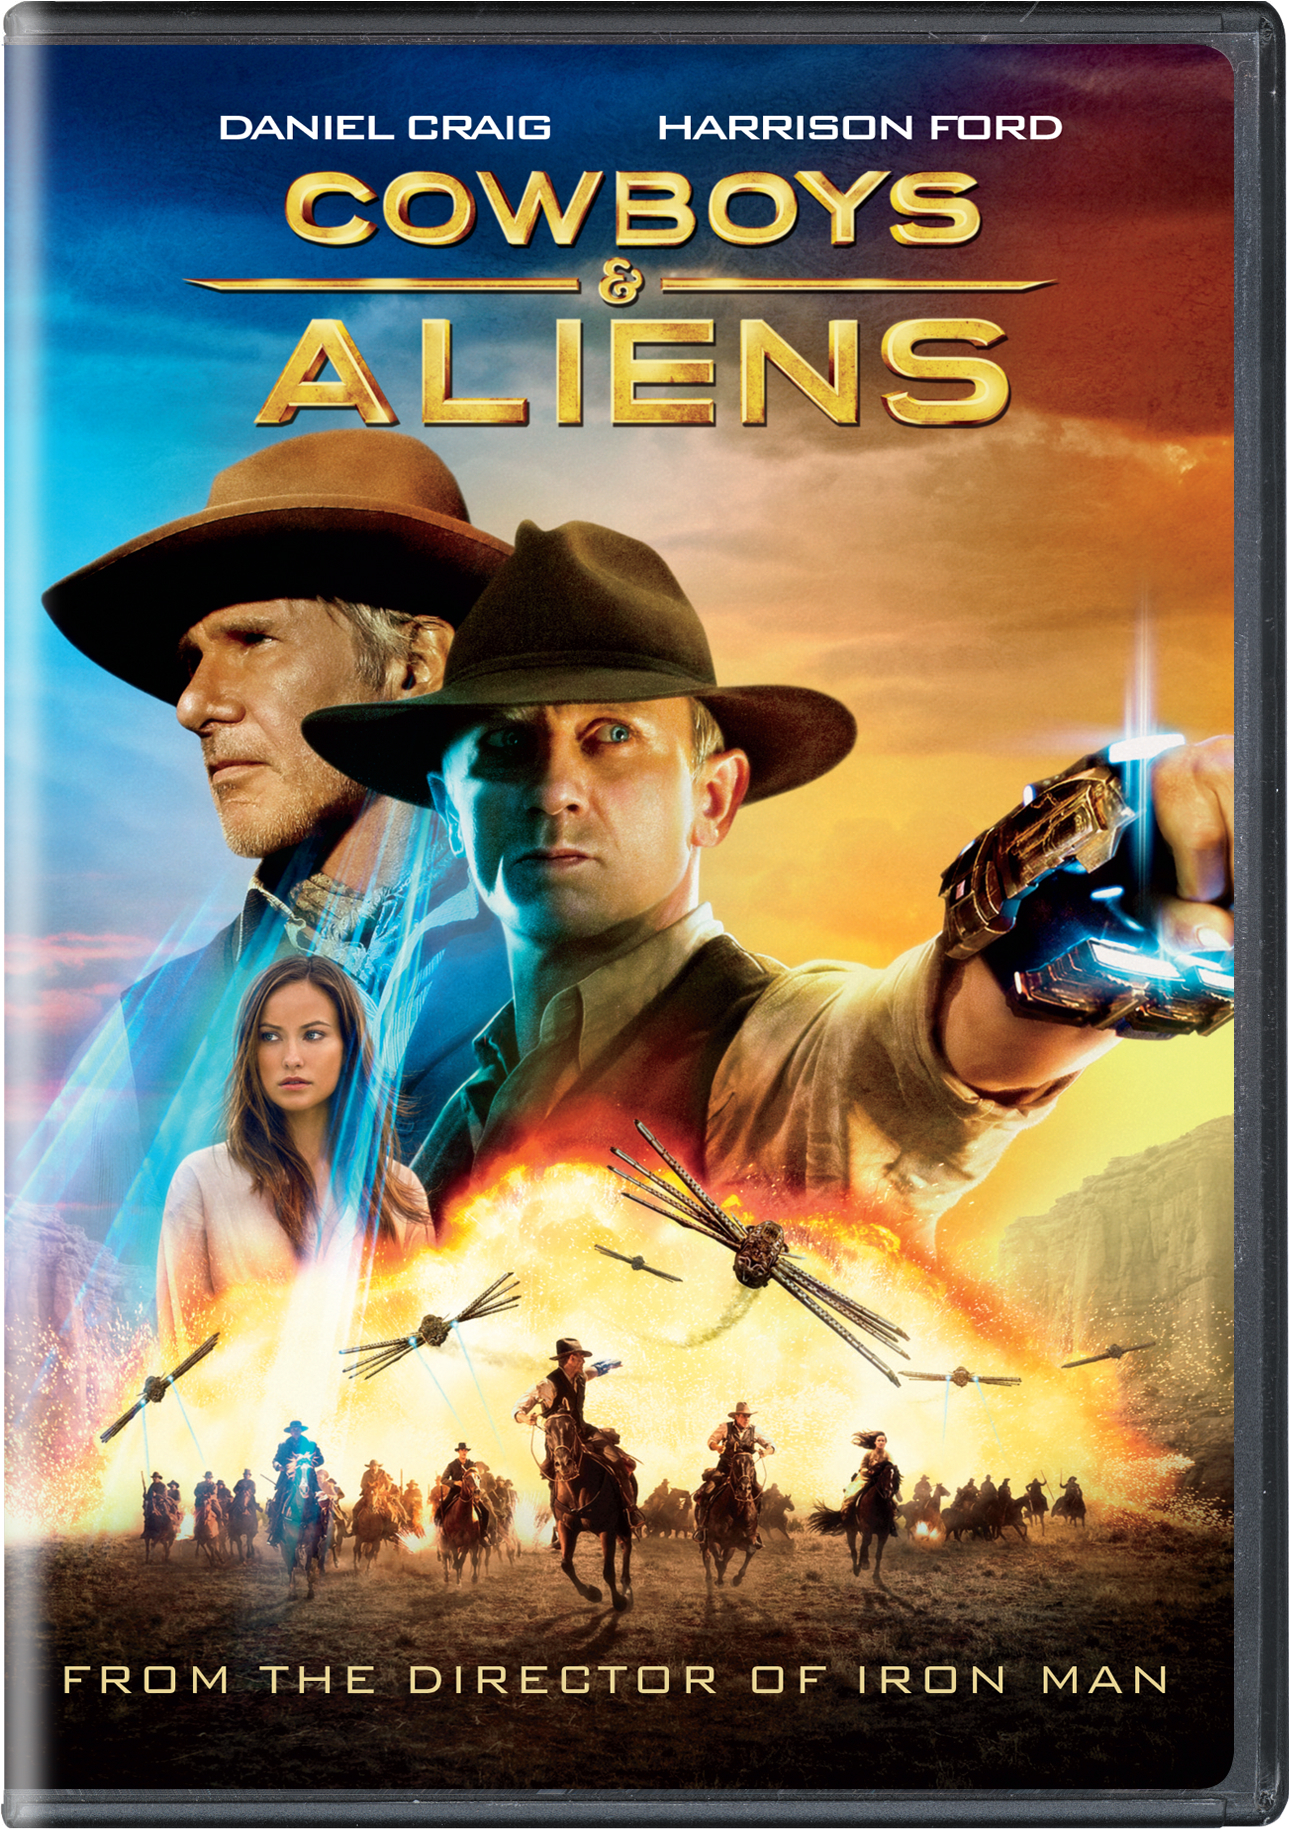 Cowboys And Aliens - DVD [ 2011 ]  - Sci Fi Movies On DVD - Movies On GRUV